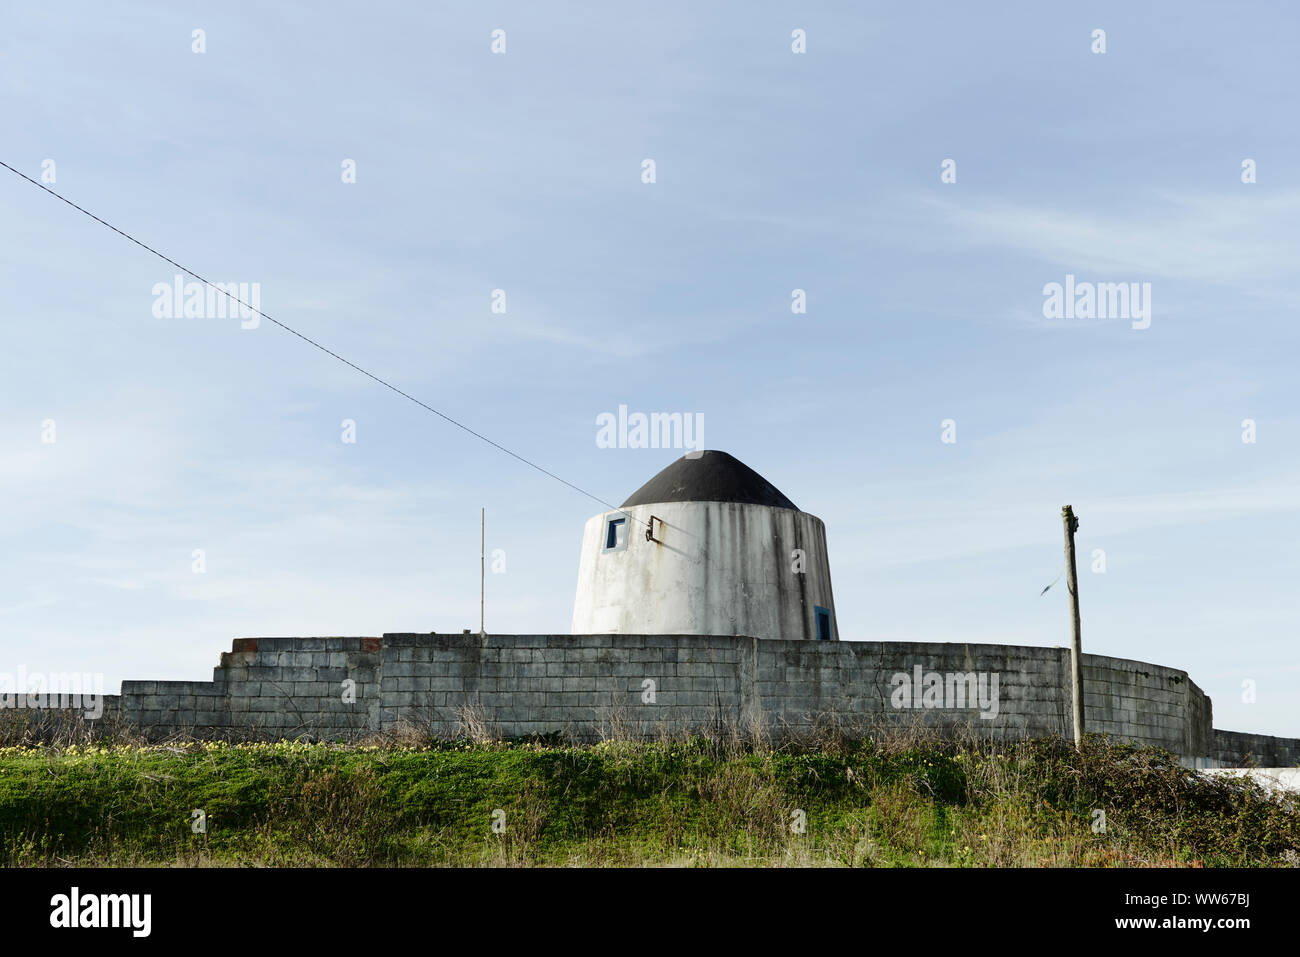 old windmill with wall, blue sky with clouds Stock Photo